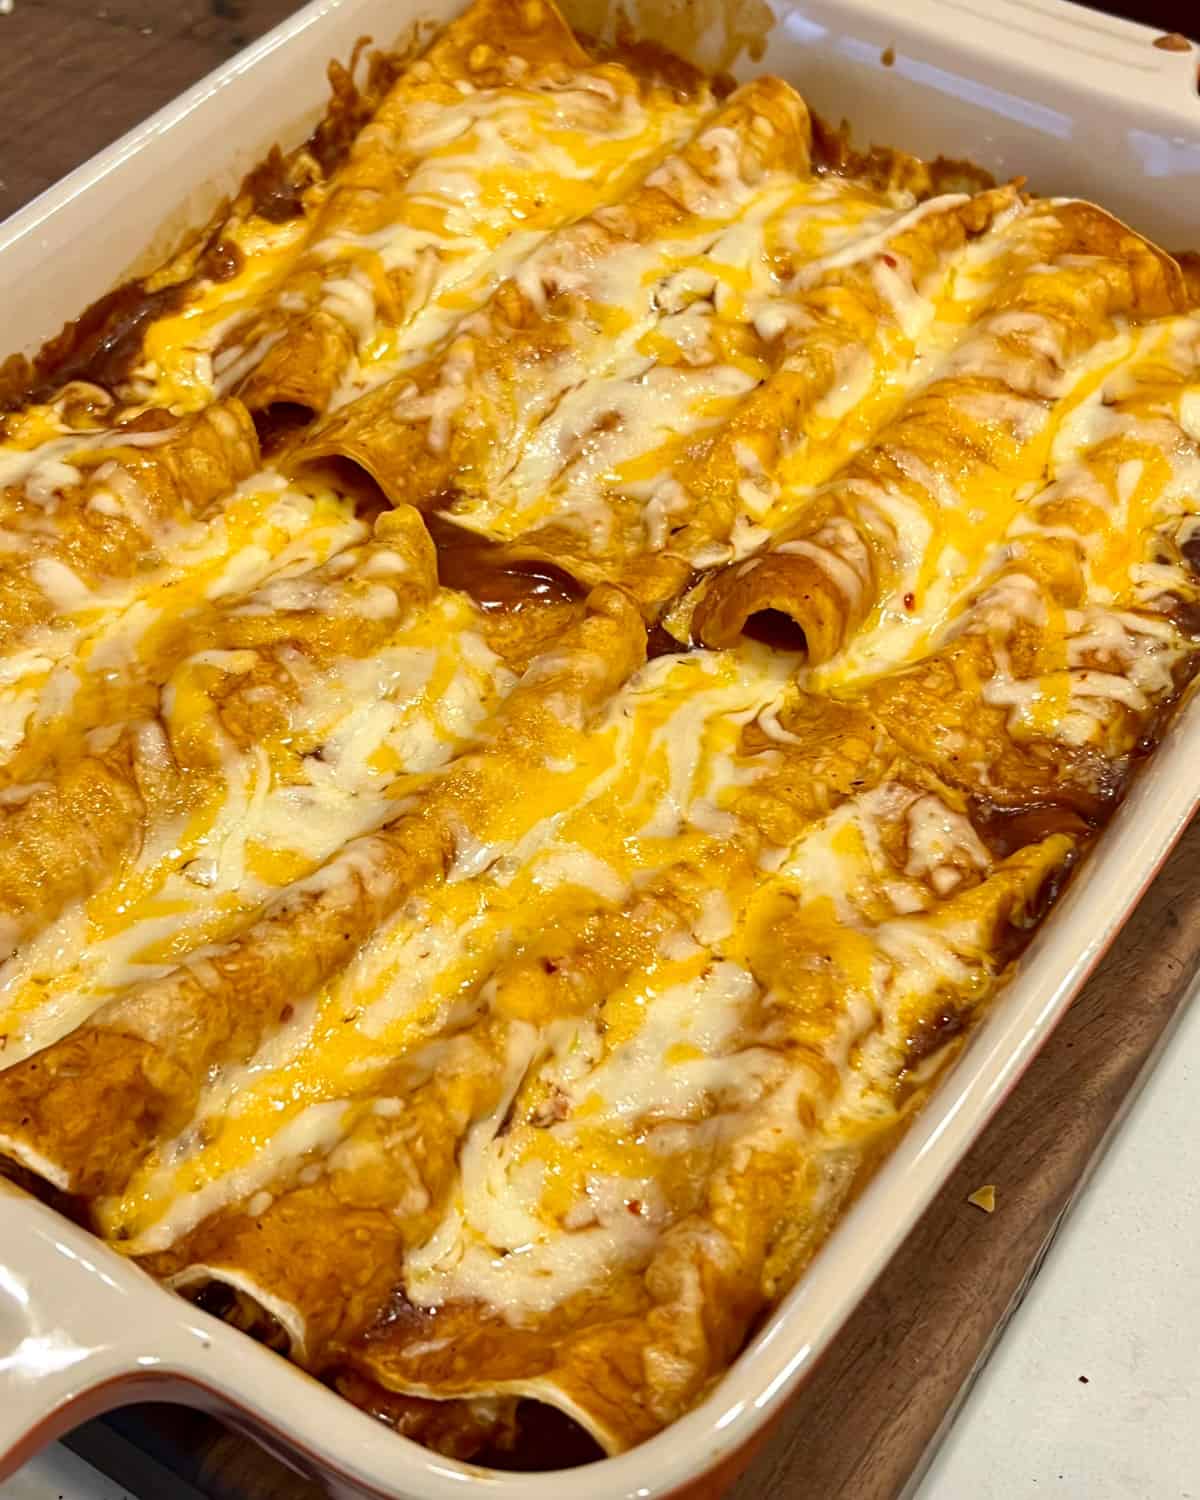 Baked Mexican enchiladas in a rectangular dish.